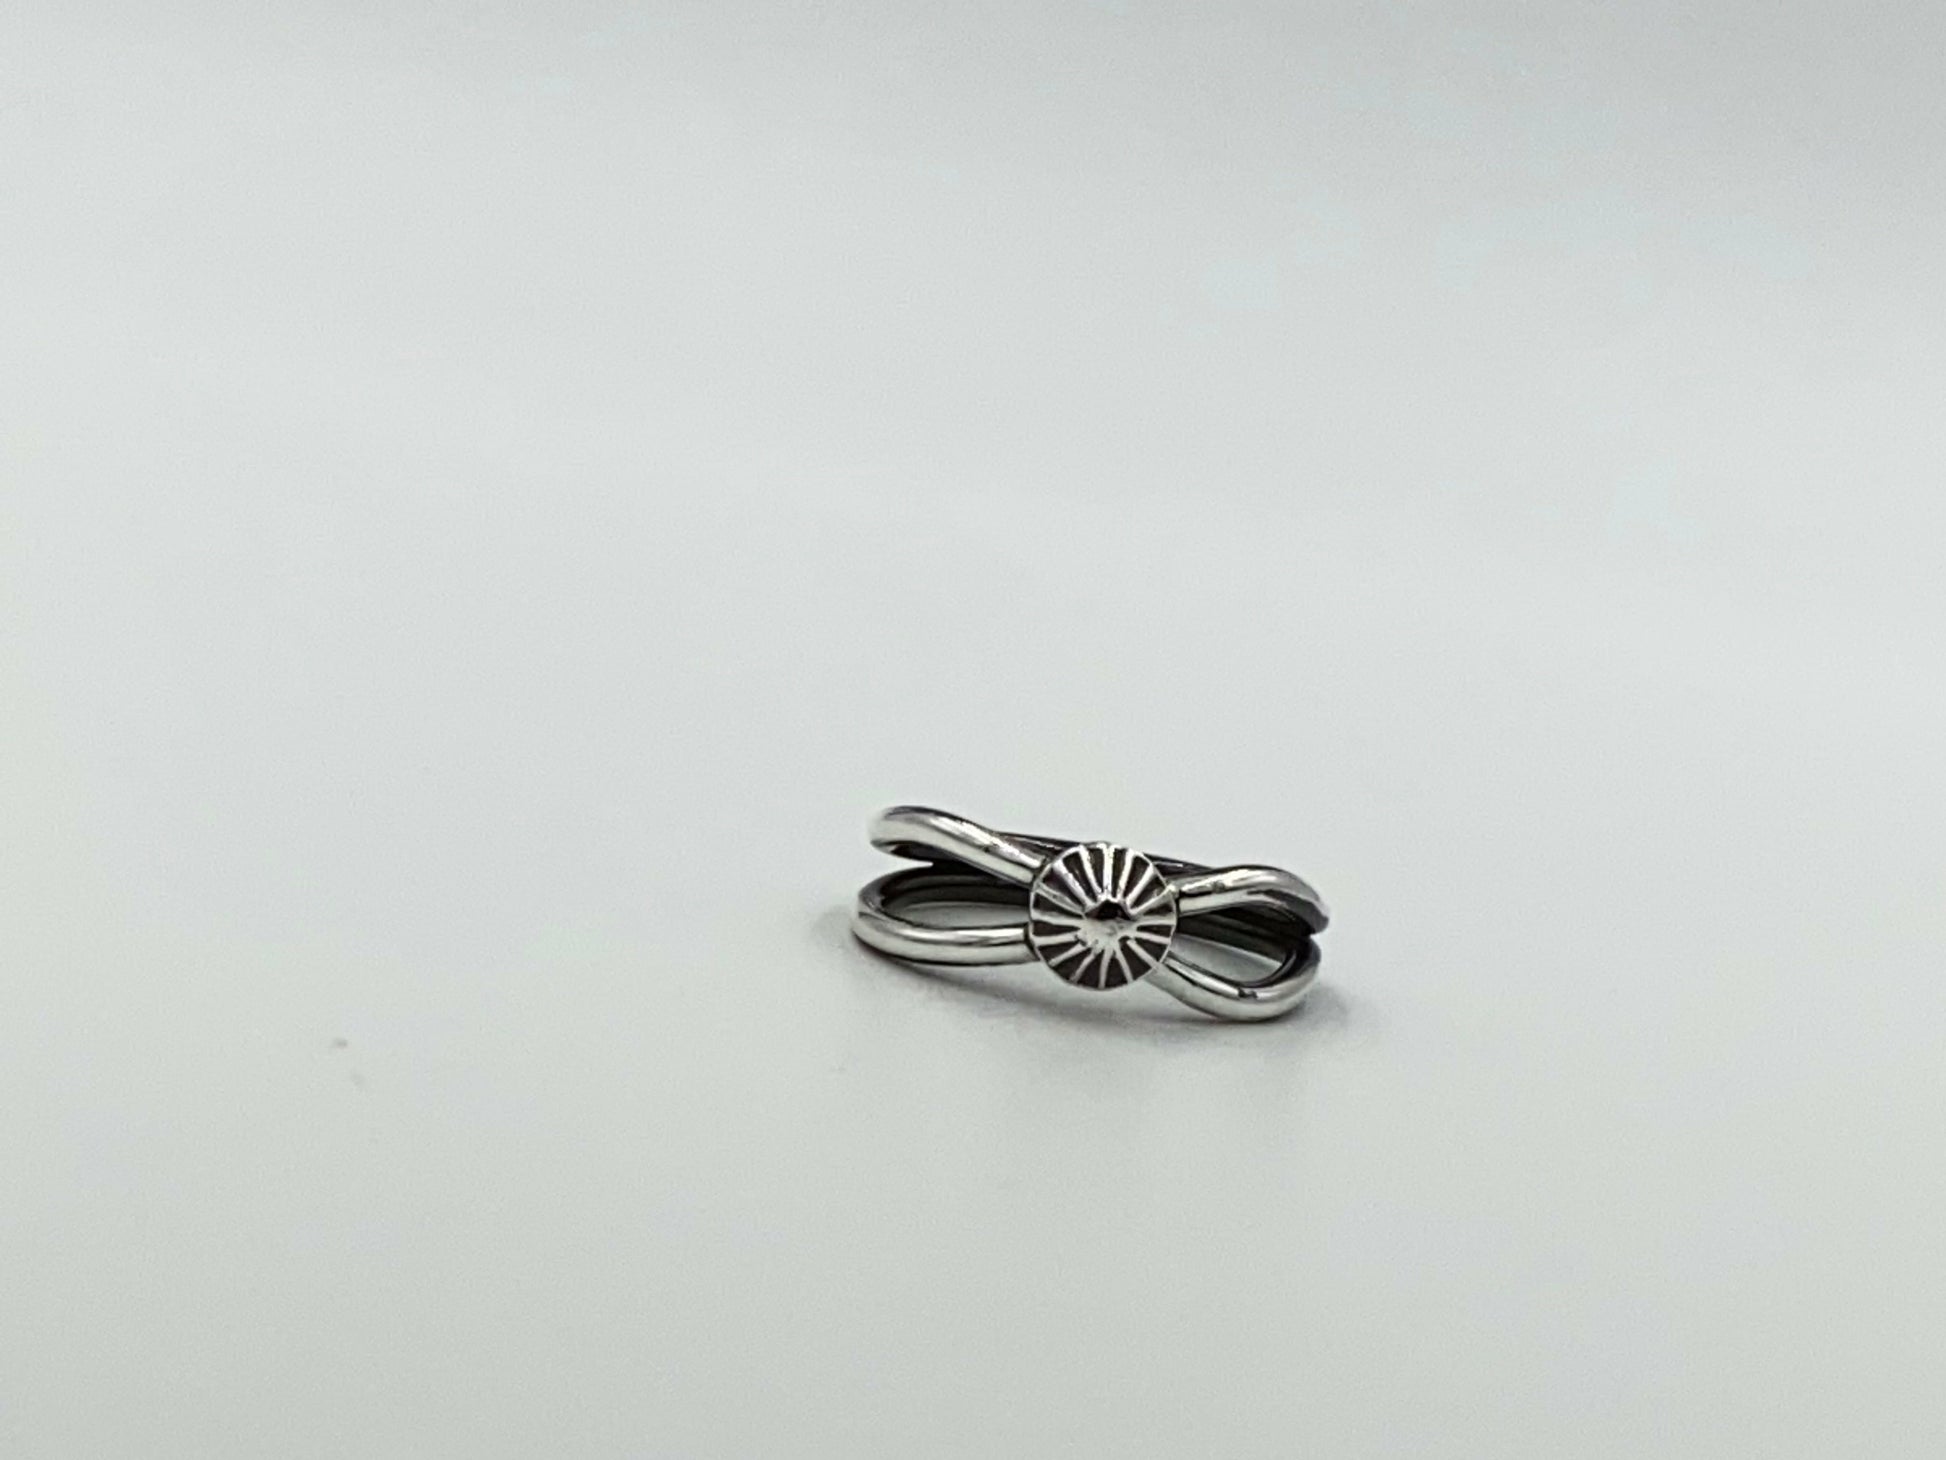 Split shank ring with center focal of a spiral ornated silver pendent. Small and dainty